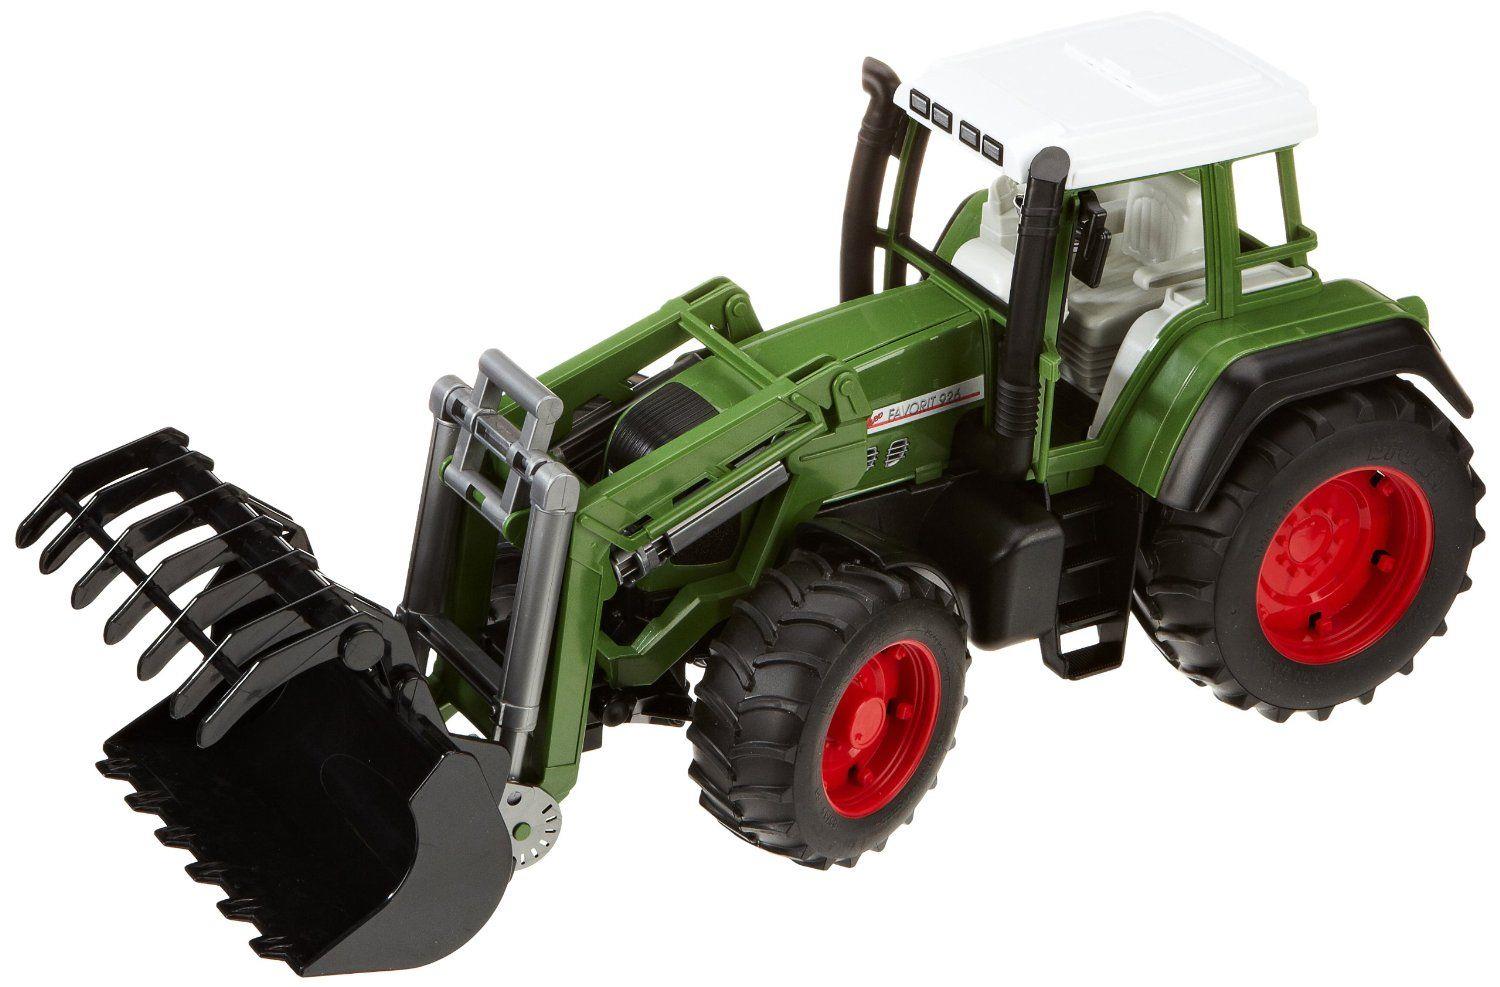 Fendt Favorit 926 Tractor with Front Loader Vehicle Toy by Bruder (02062) 